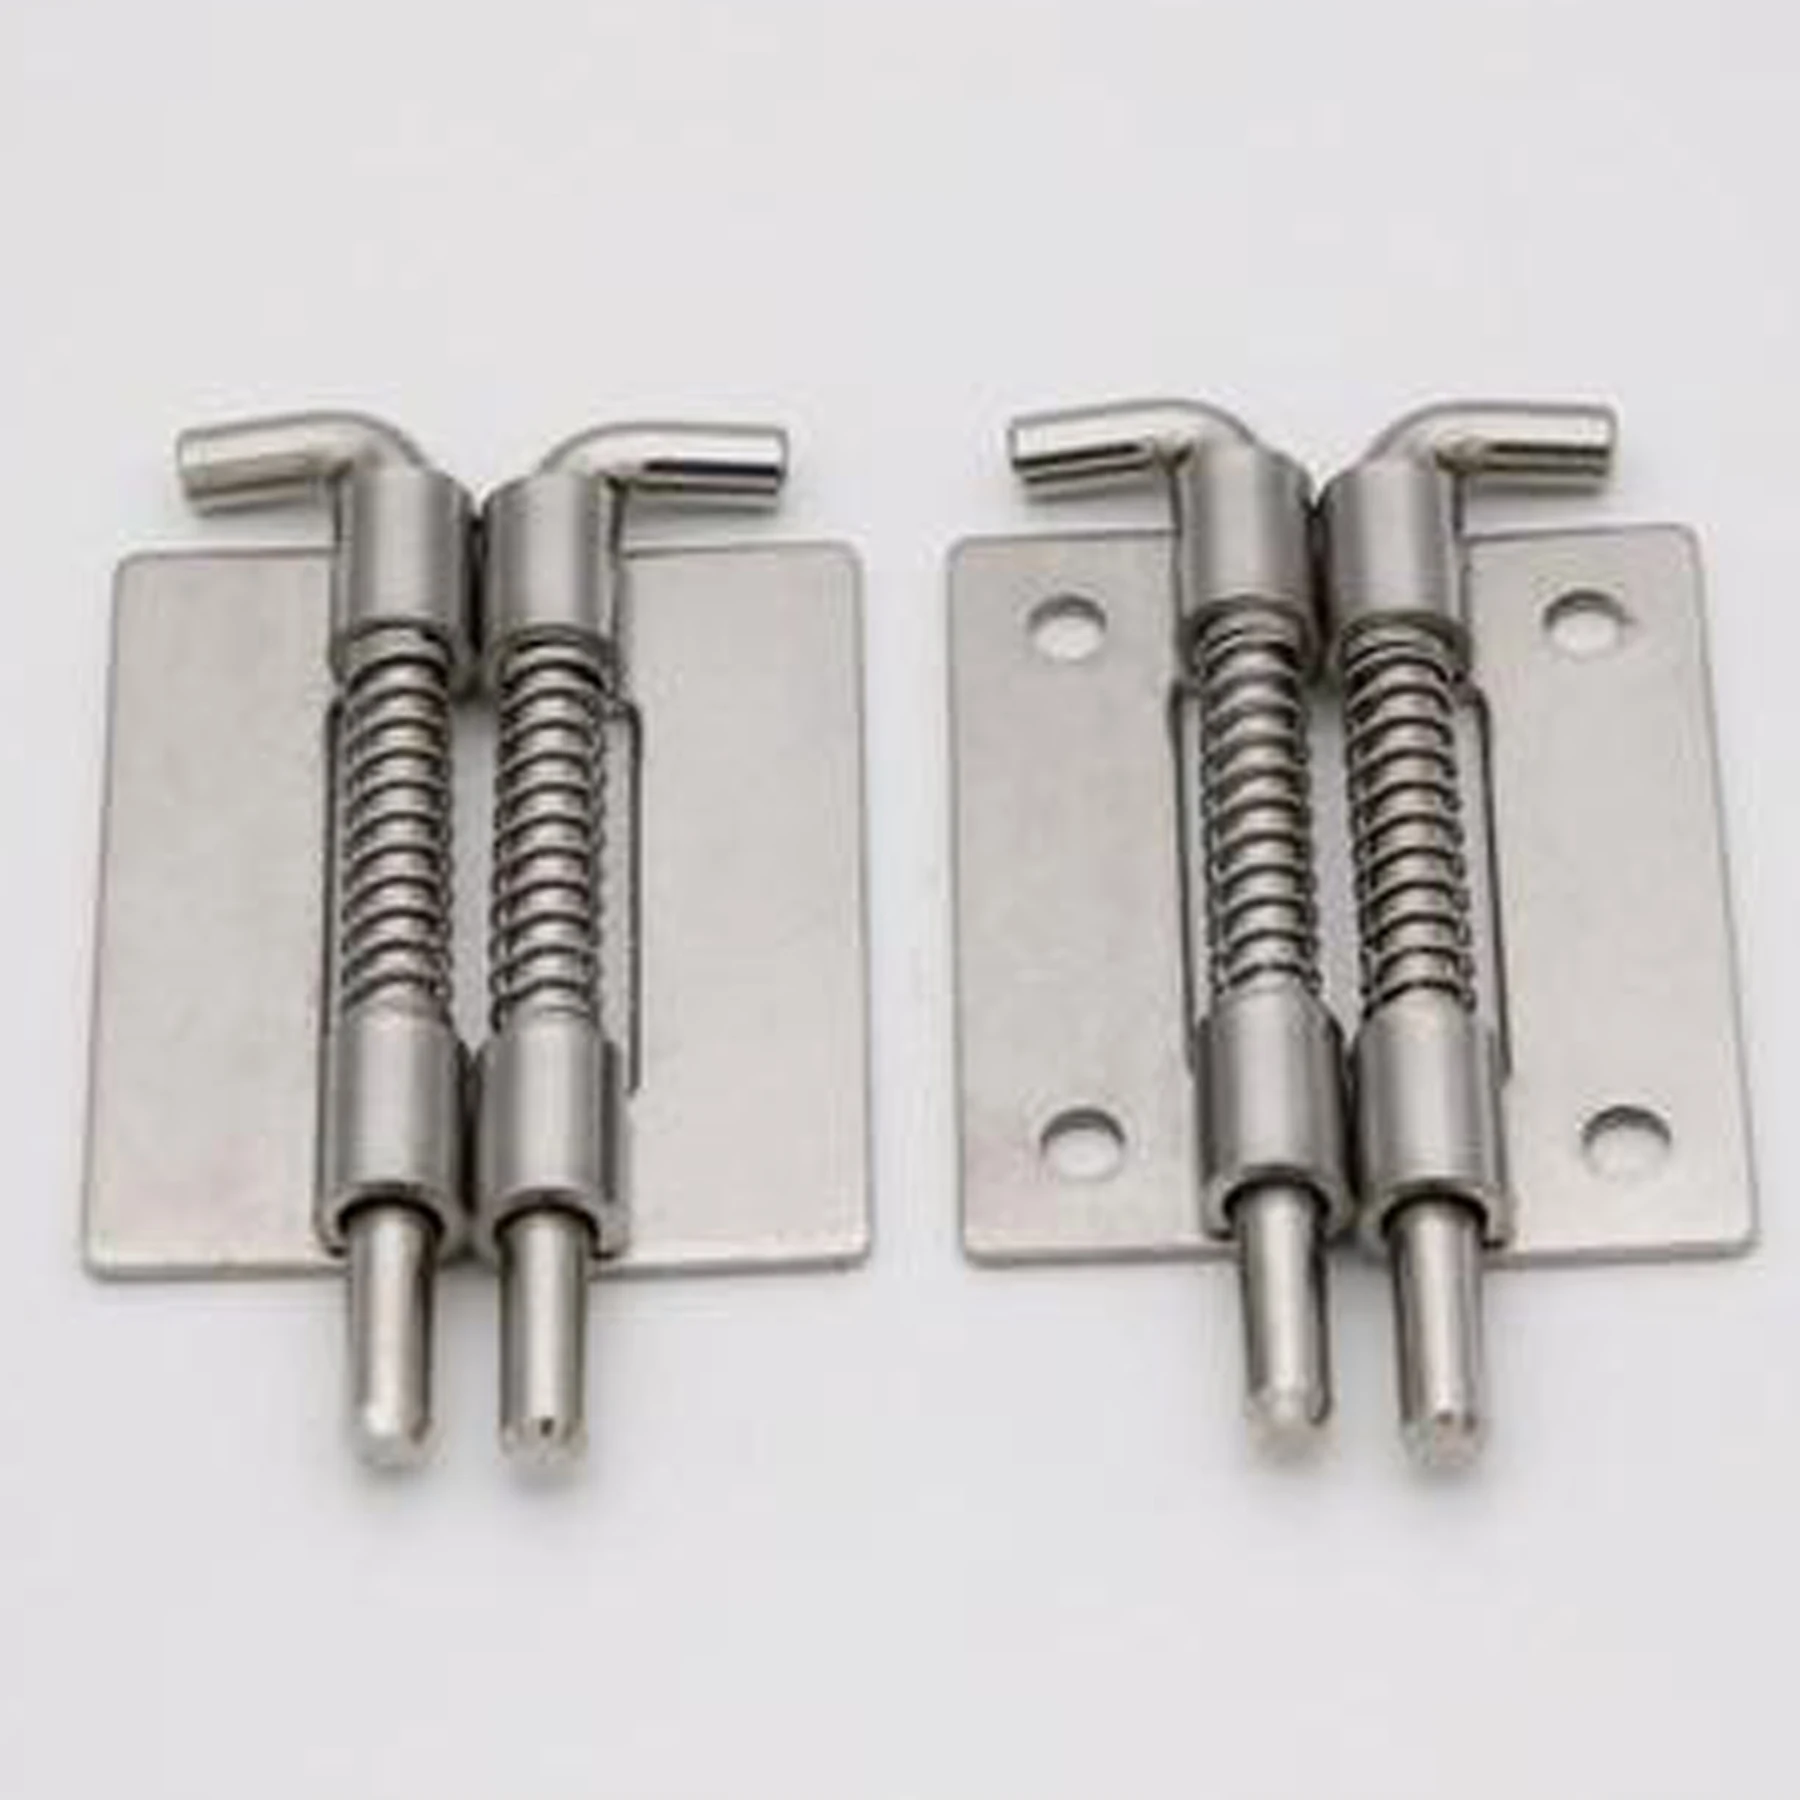 Hot Sale 180 Degree Spring Loaded Pin Hinge For Door Cabinet Buy Pin